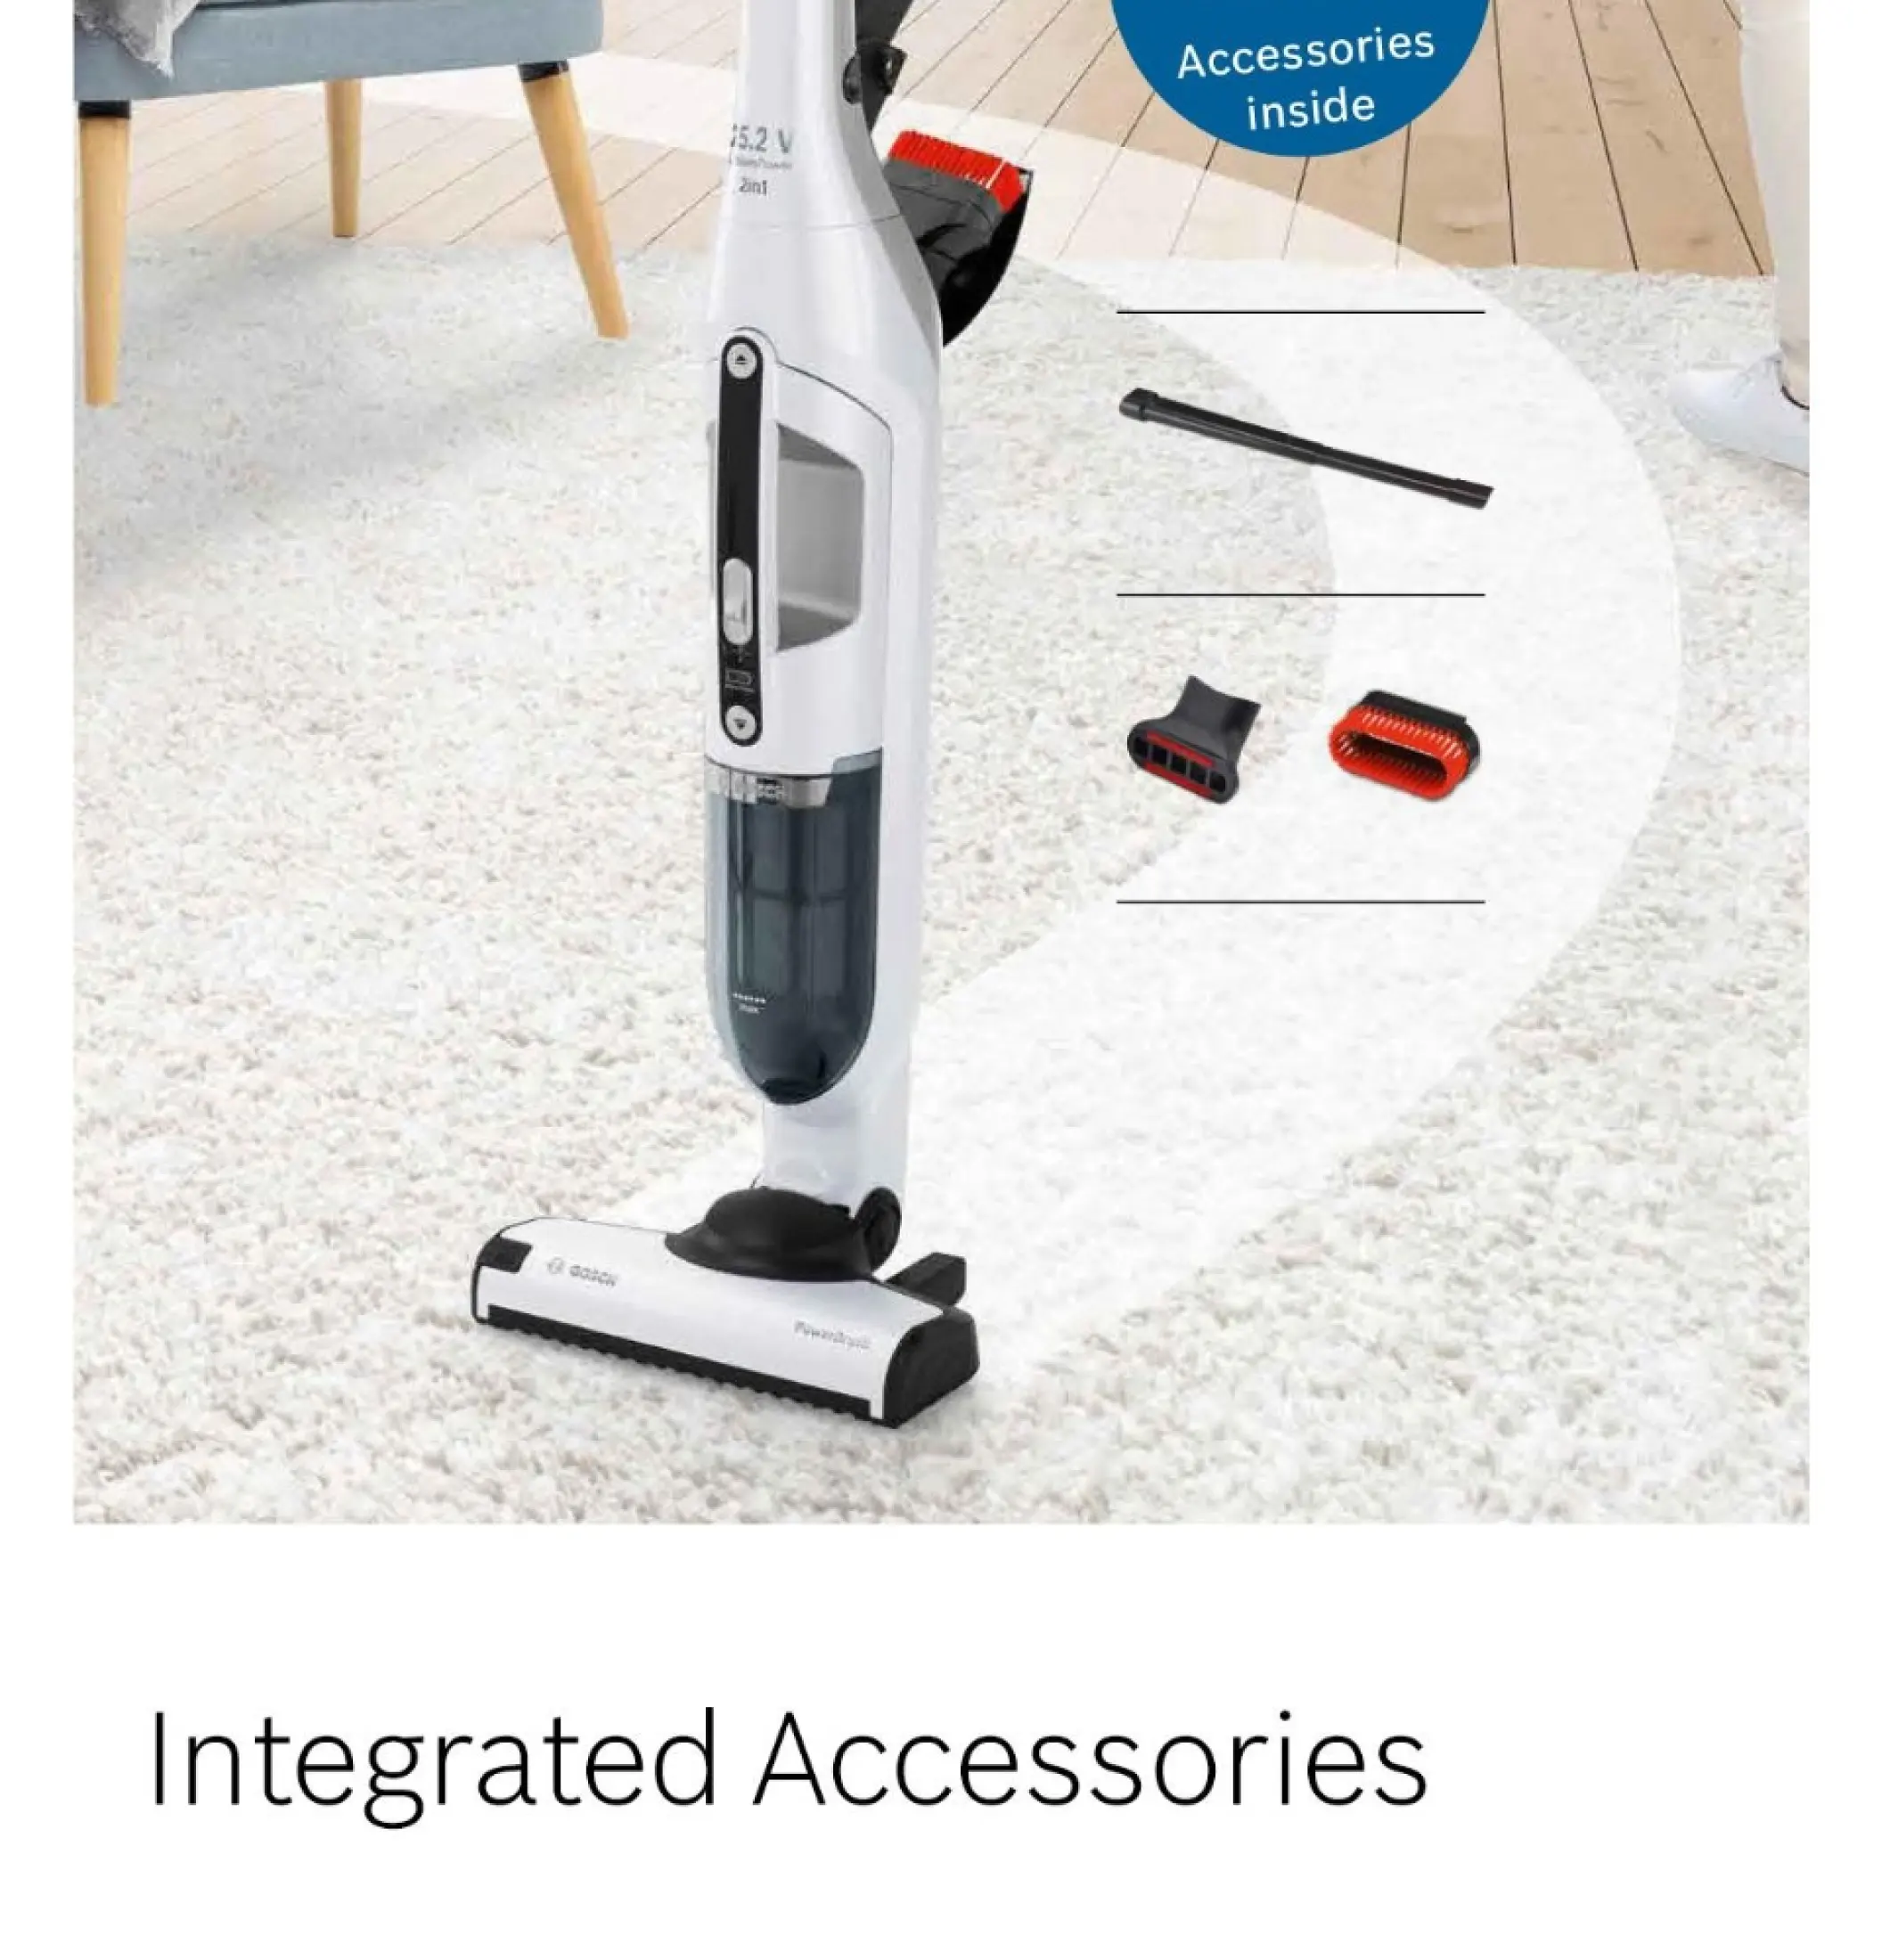 Bulky) Bosch & 2in1 handstick Cordless Vacuum cleaner Flexxo BCH3K255 polar white metallic 25.2V Li-ion rechargeable battery, Cleaning performance up to 55min usage time. 2 years Local warranty | Lazada